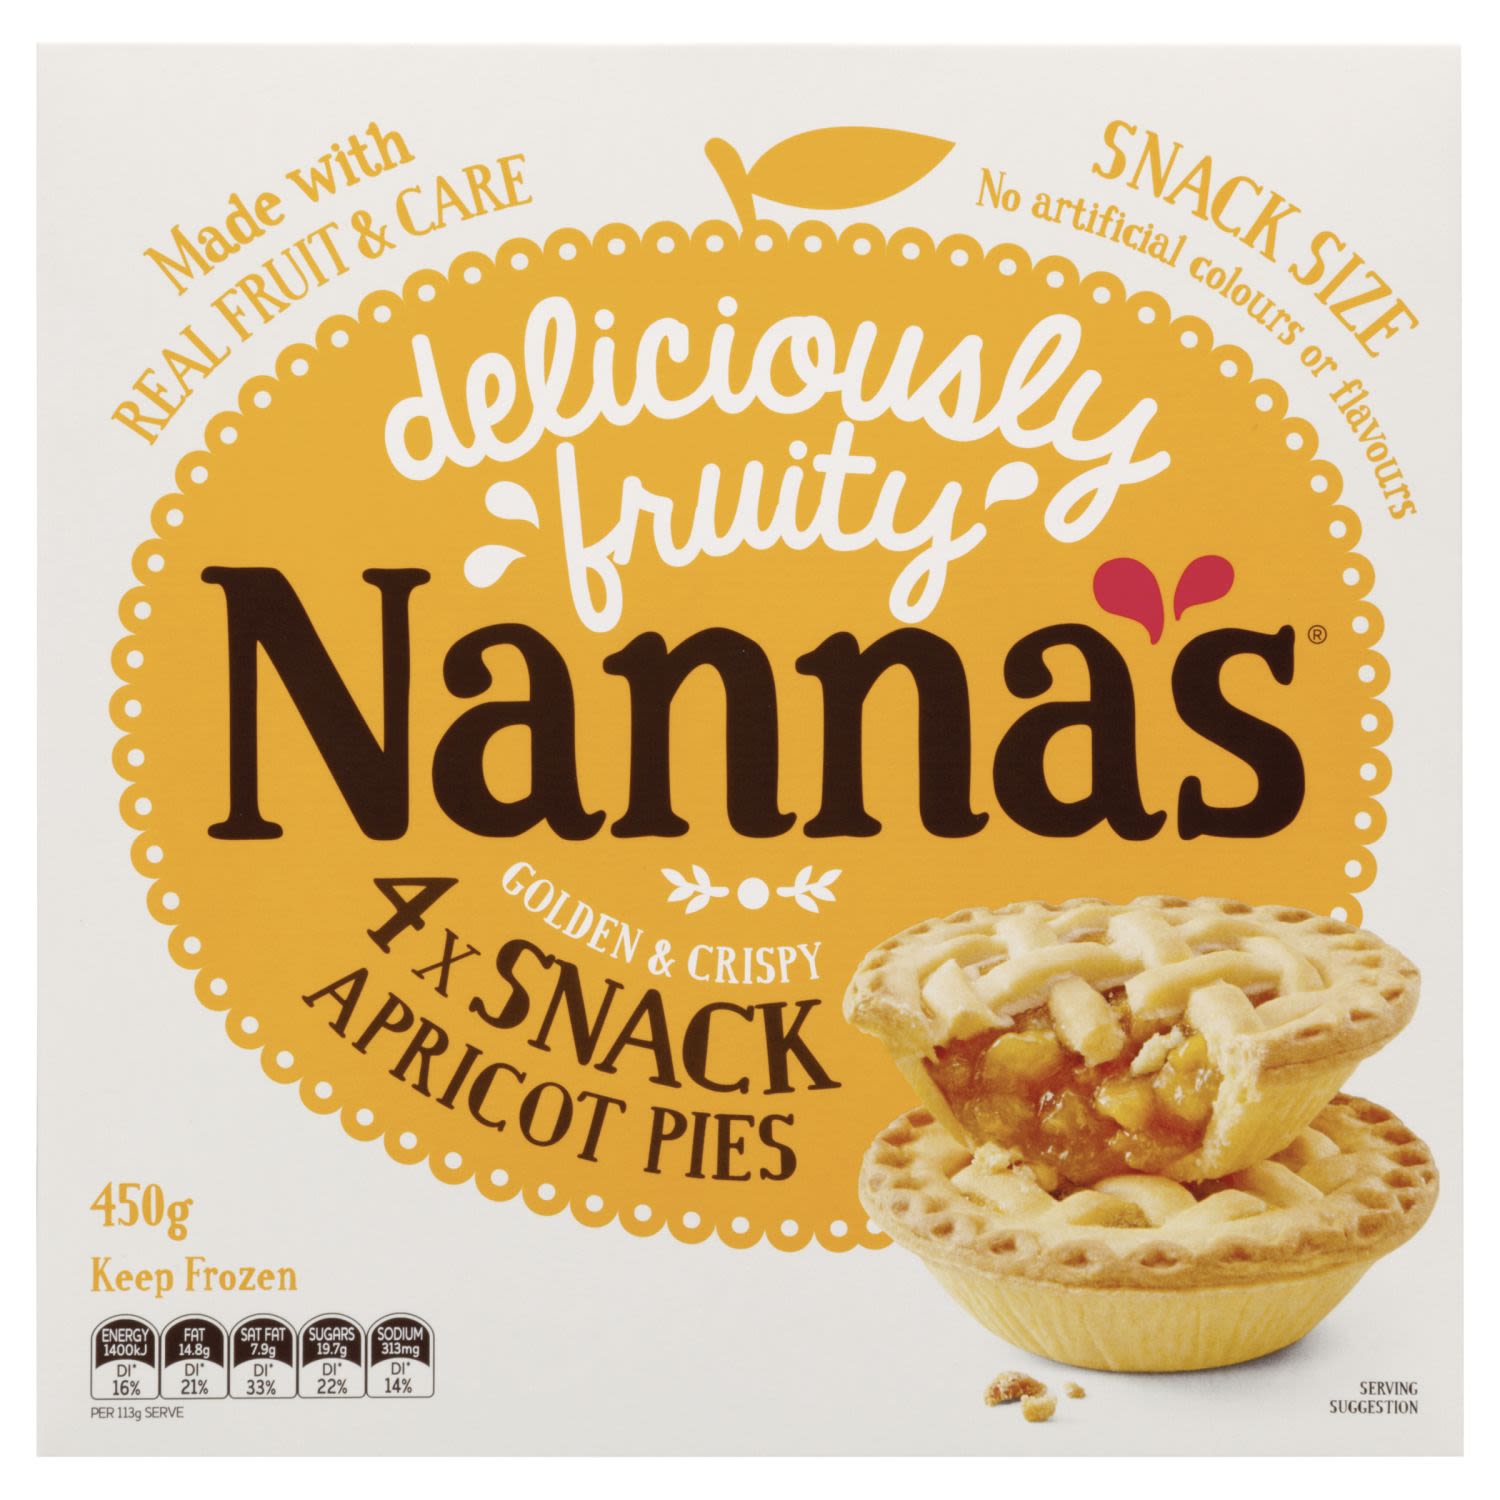 Nanna's Snack Apricot Pies, 4 Each